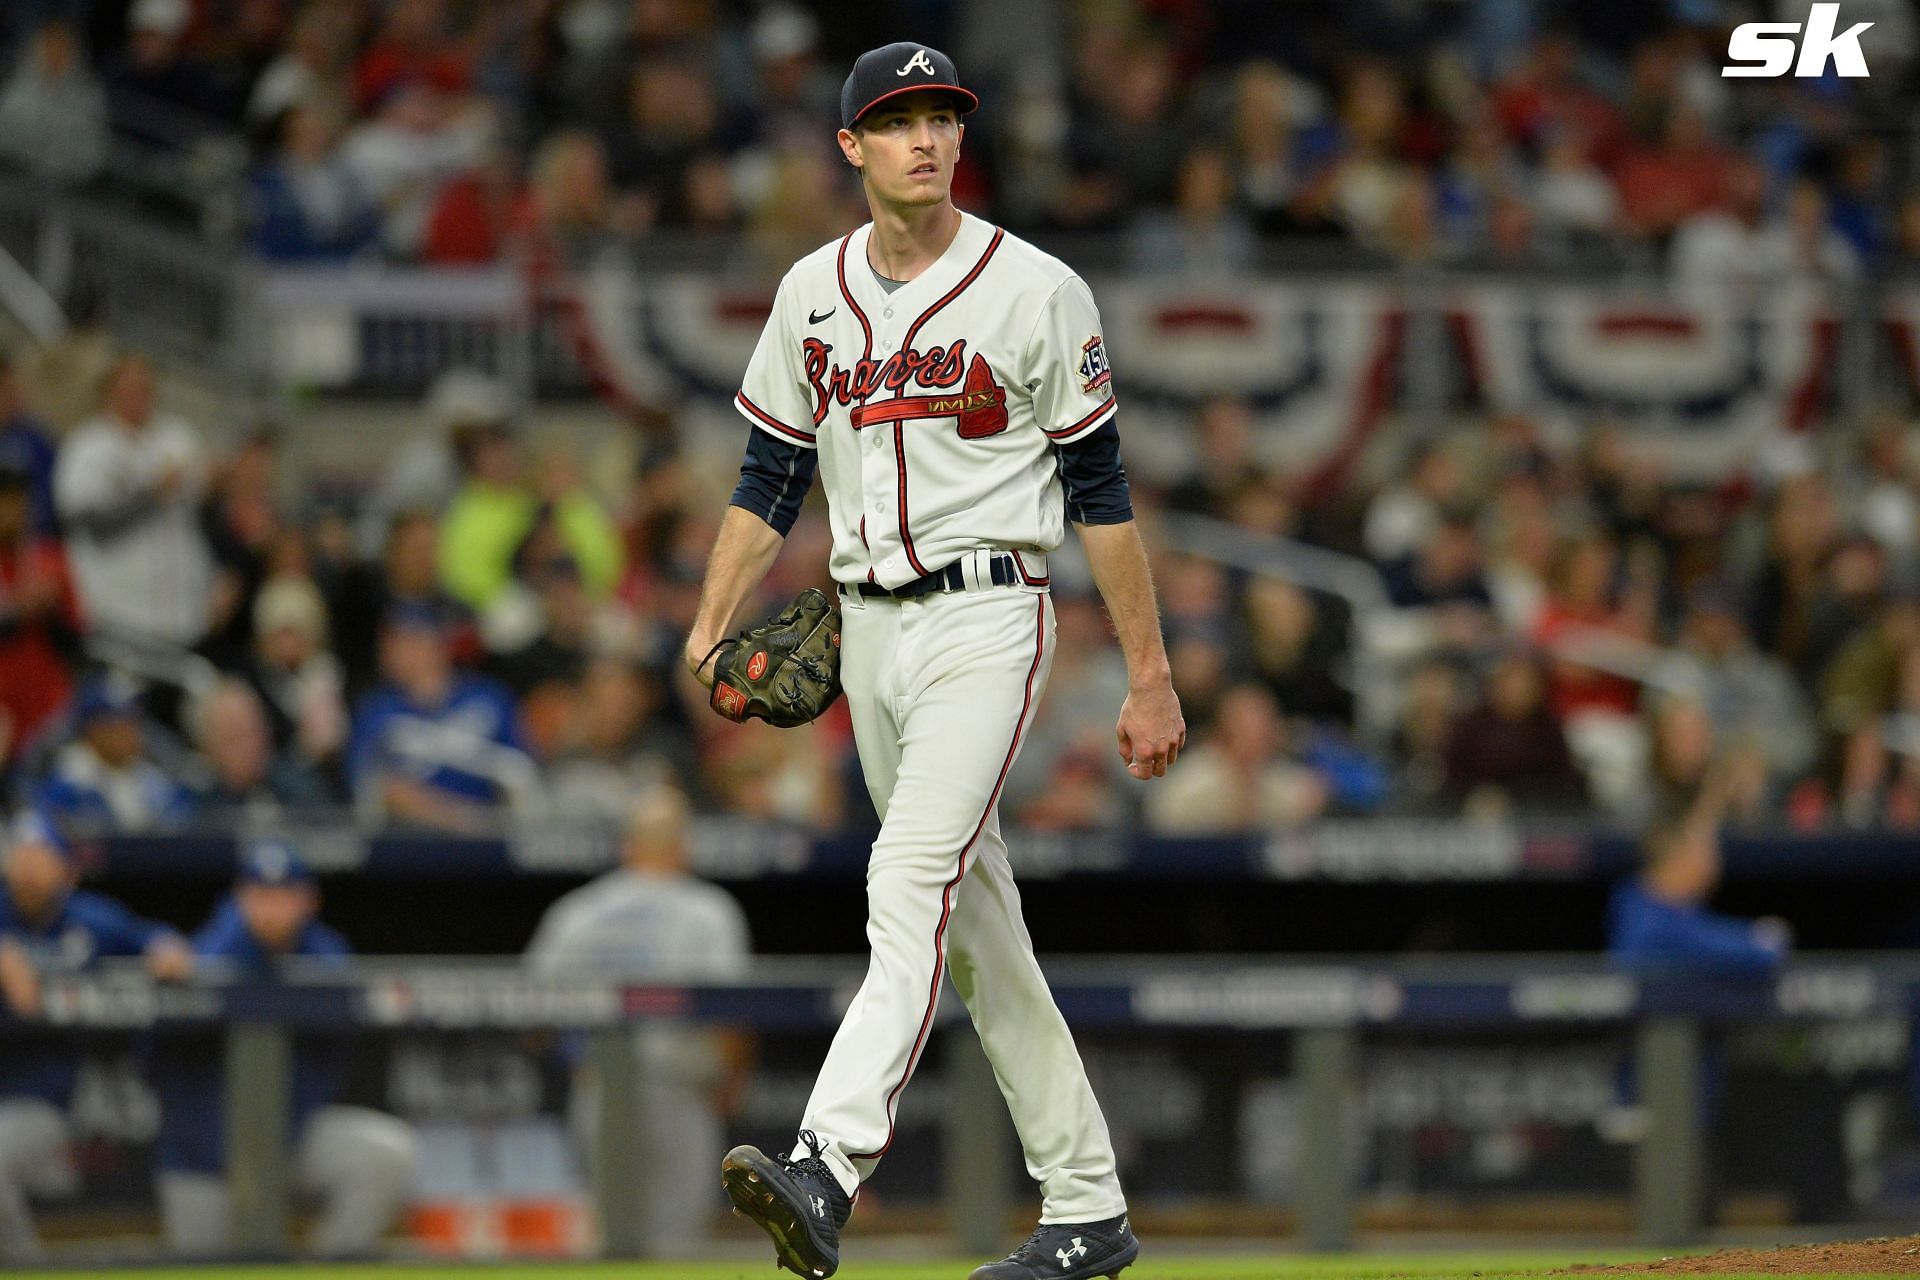 Max fried rumored to join the Dodgers